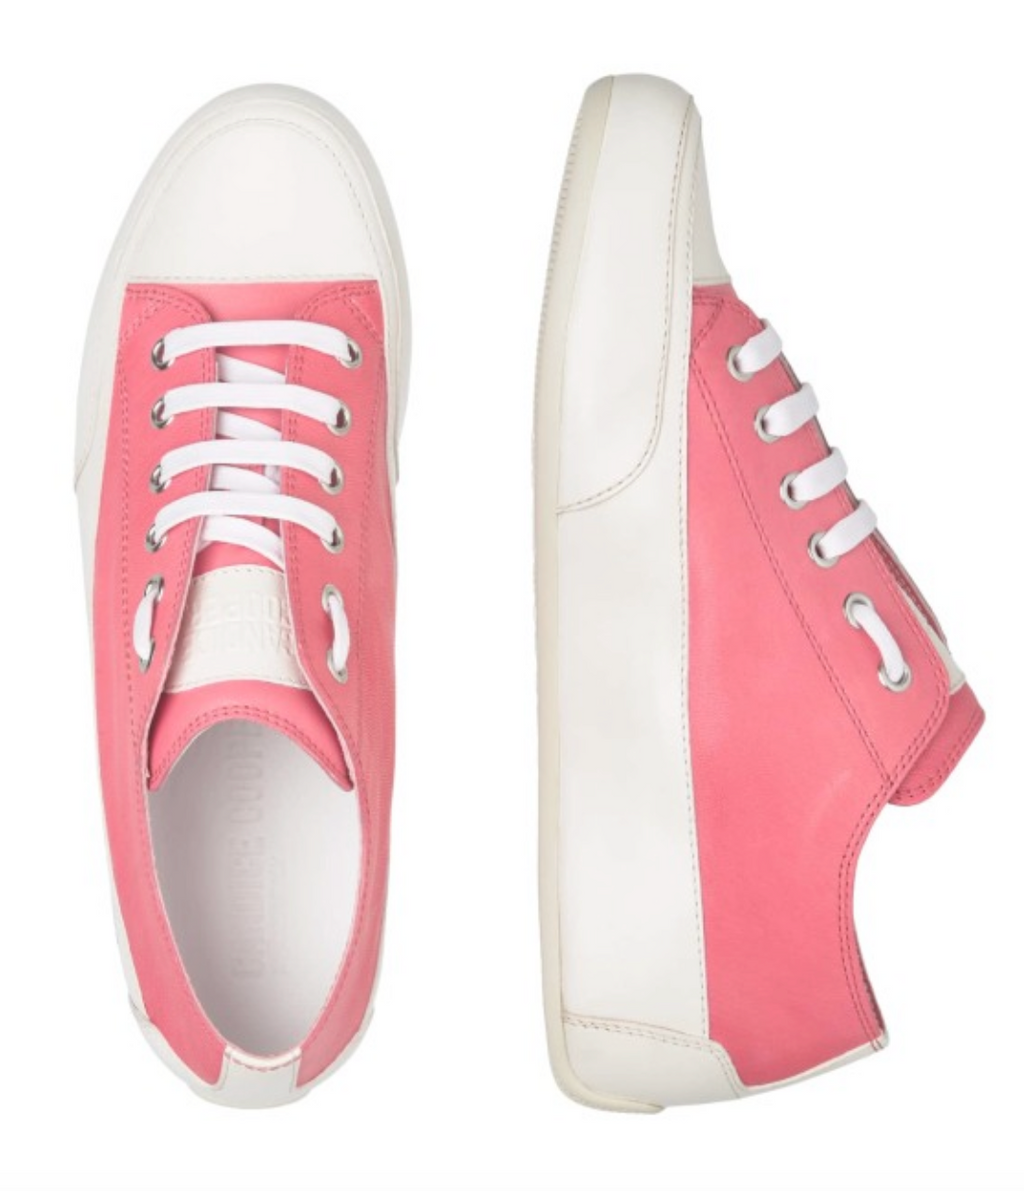 Hetre Alresford Hampshire Shoe Store Candice Cooper Coral Buffed Leather Sneaker